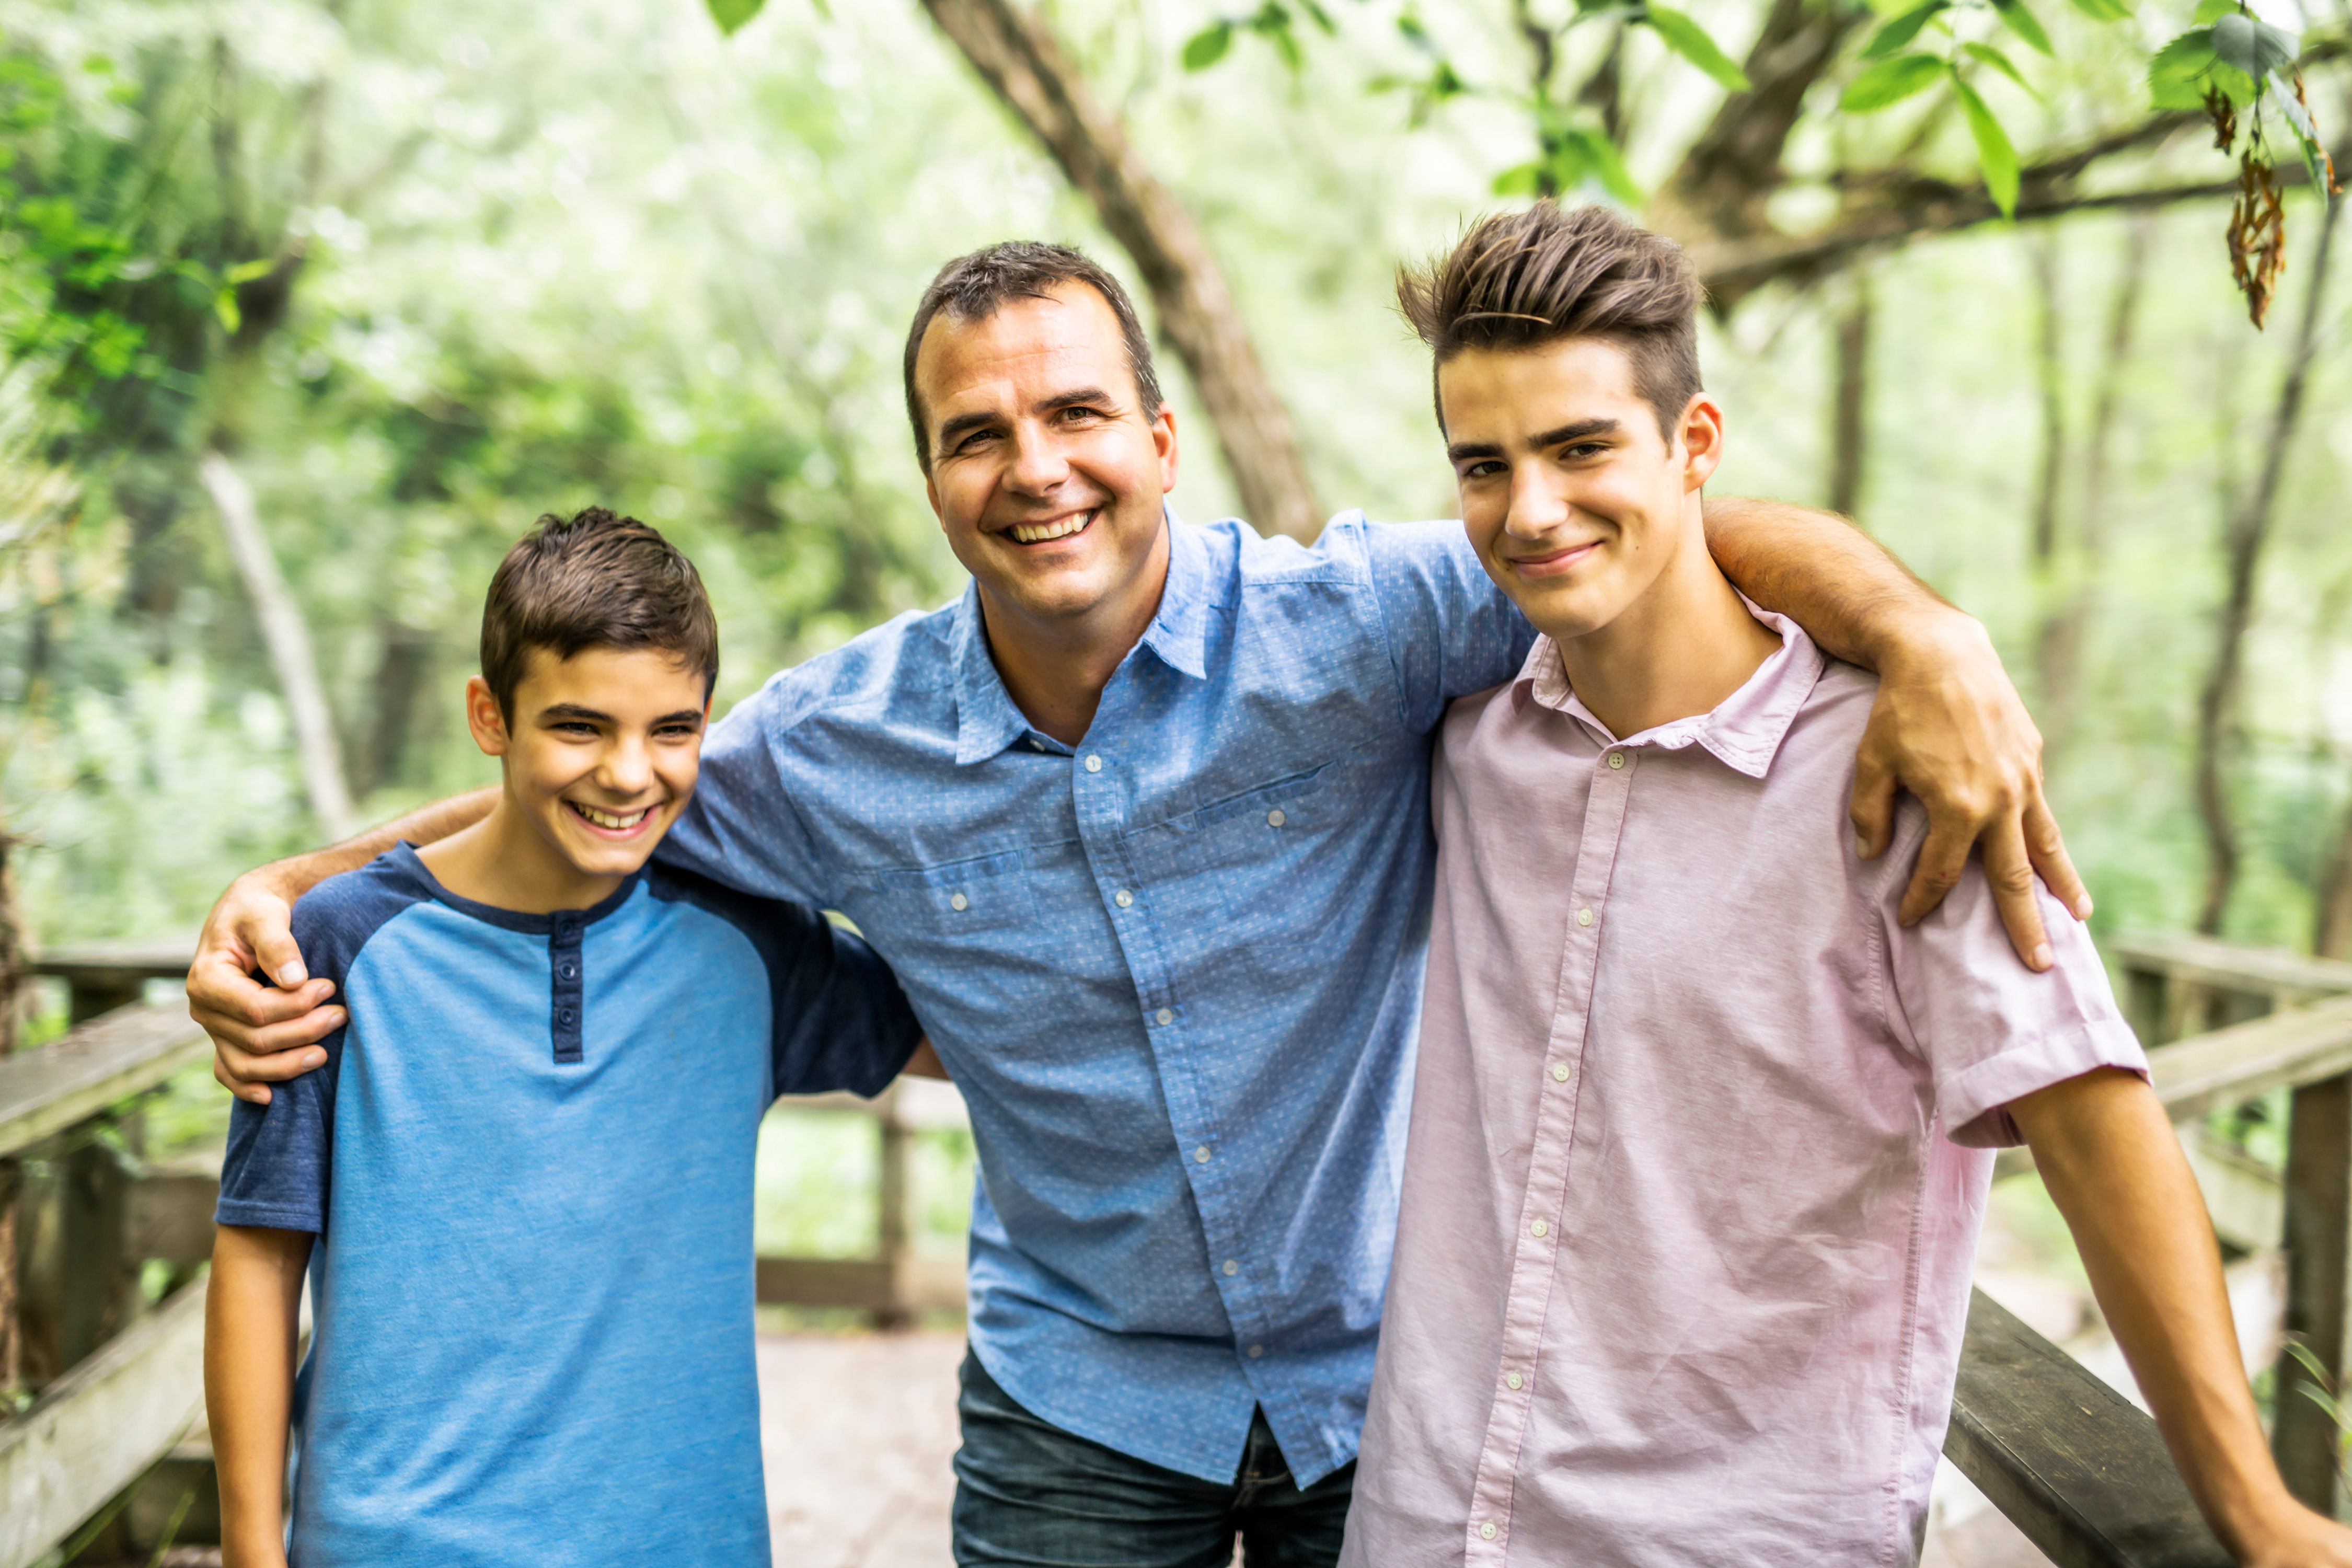 A man standing with two young boys | Source: Shutterstock